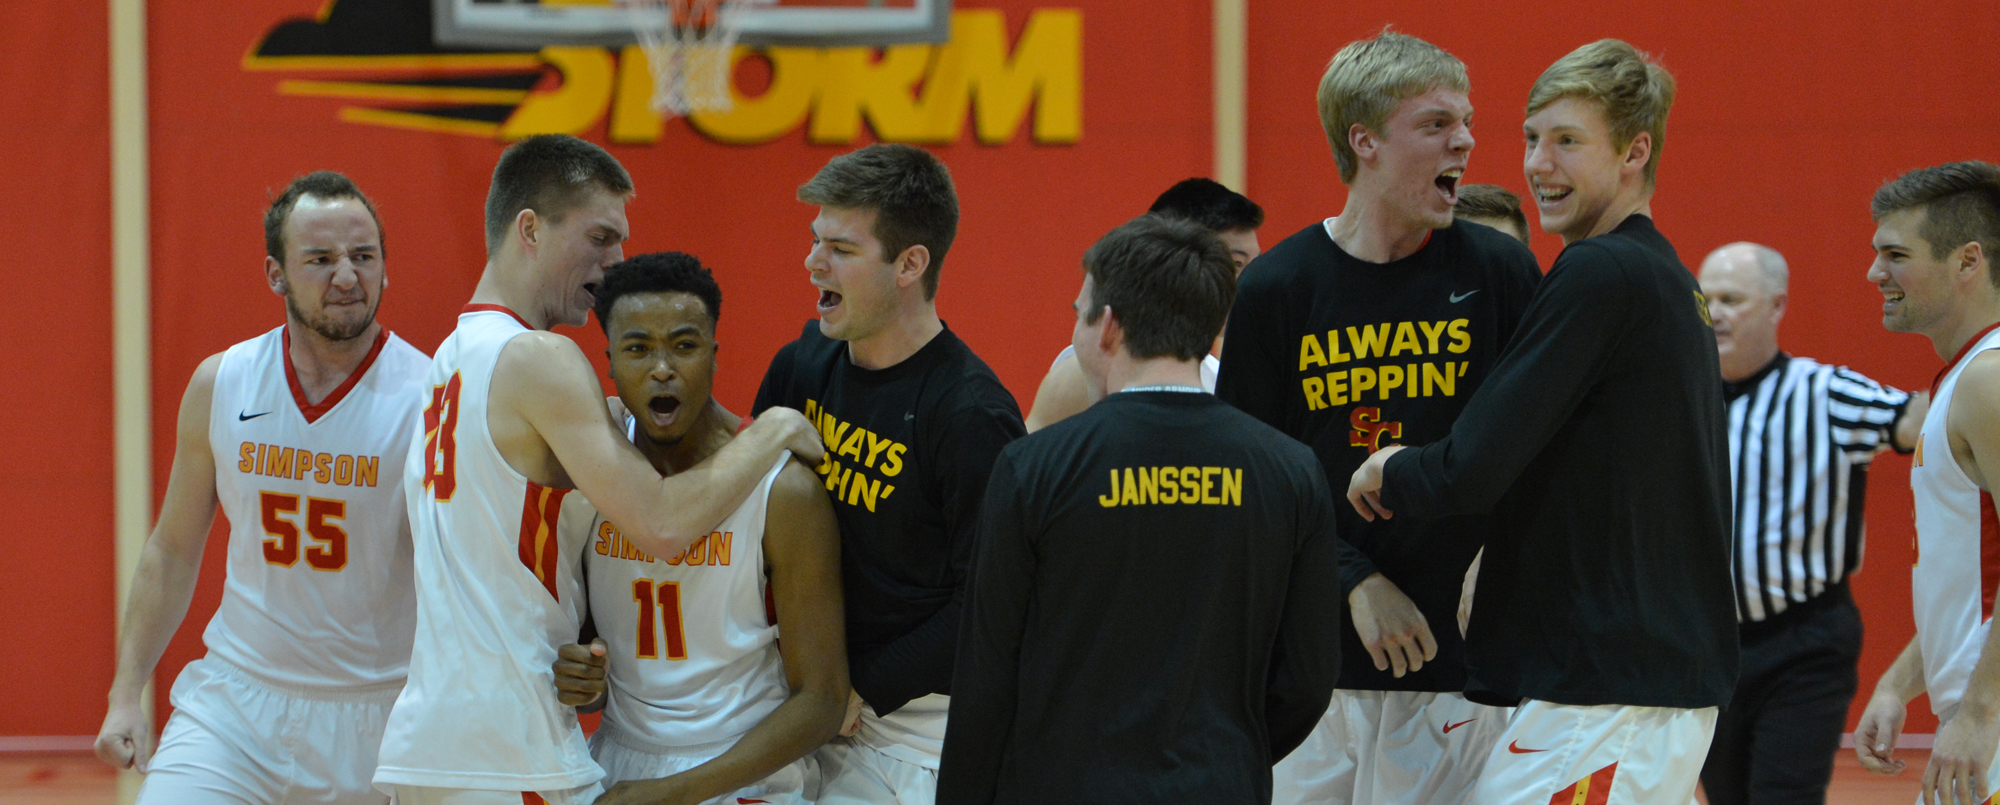 Simpson came back from 12 down to beat Central 64-63 on Wednesday.